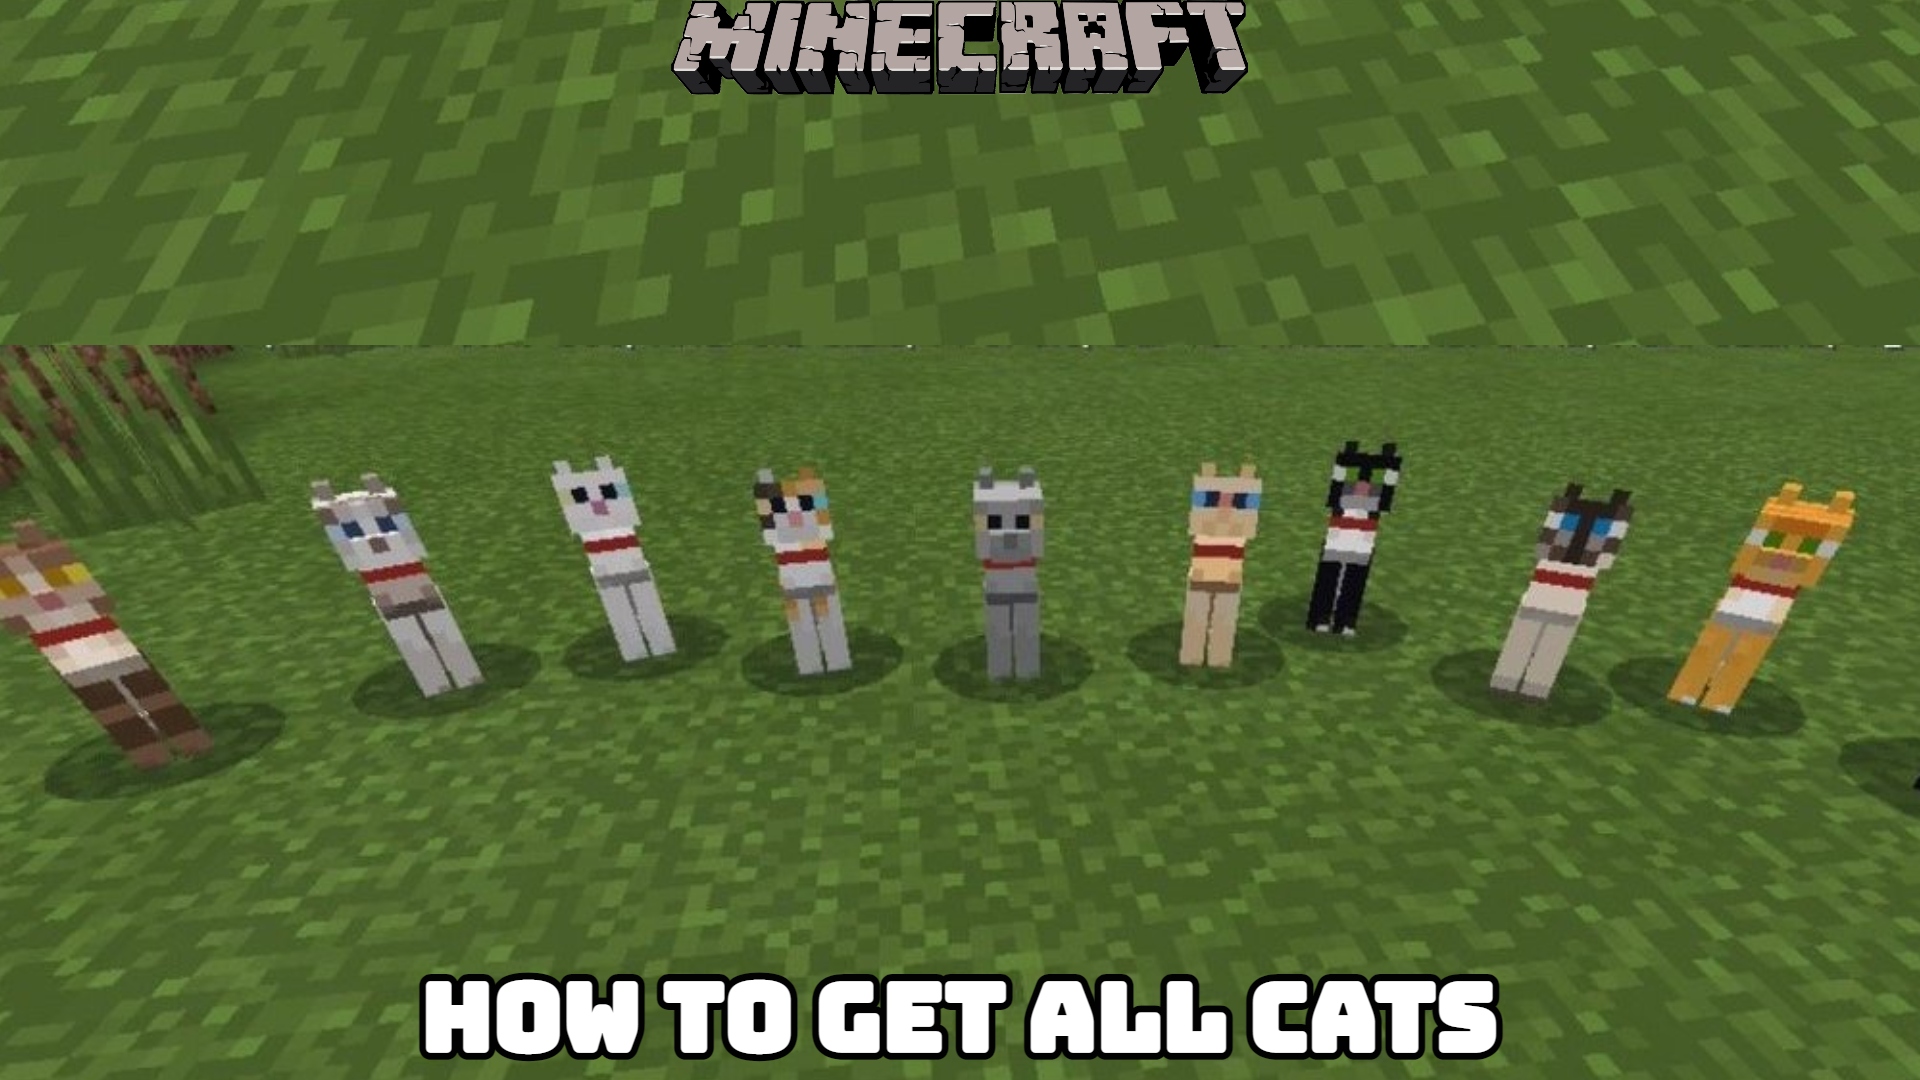 How To Get All Cats In Minecraft